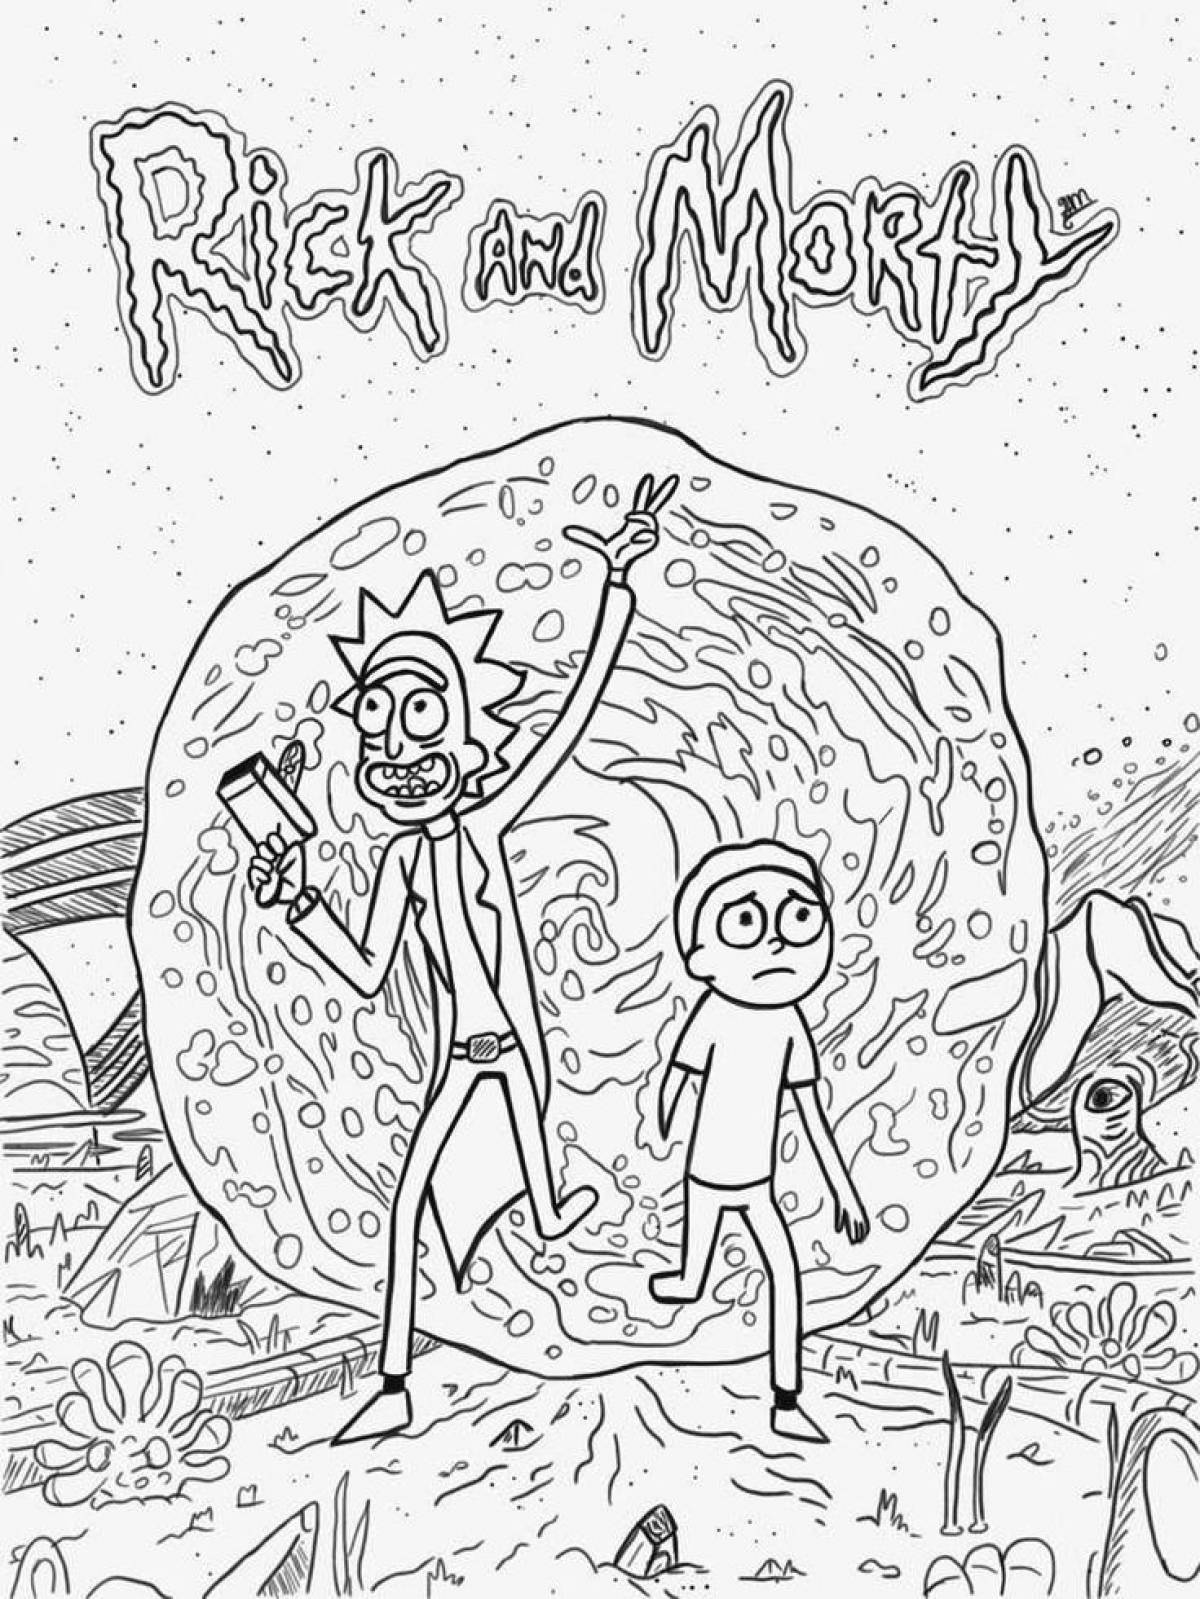 Rick and Morty travel